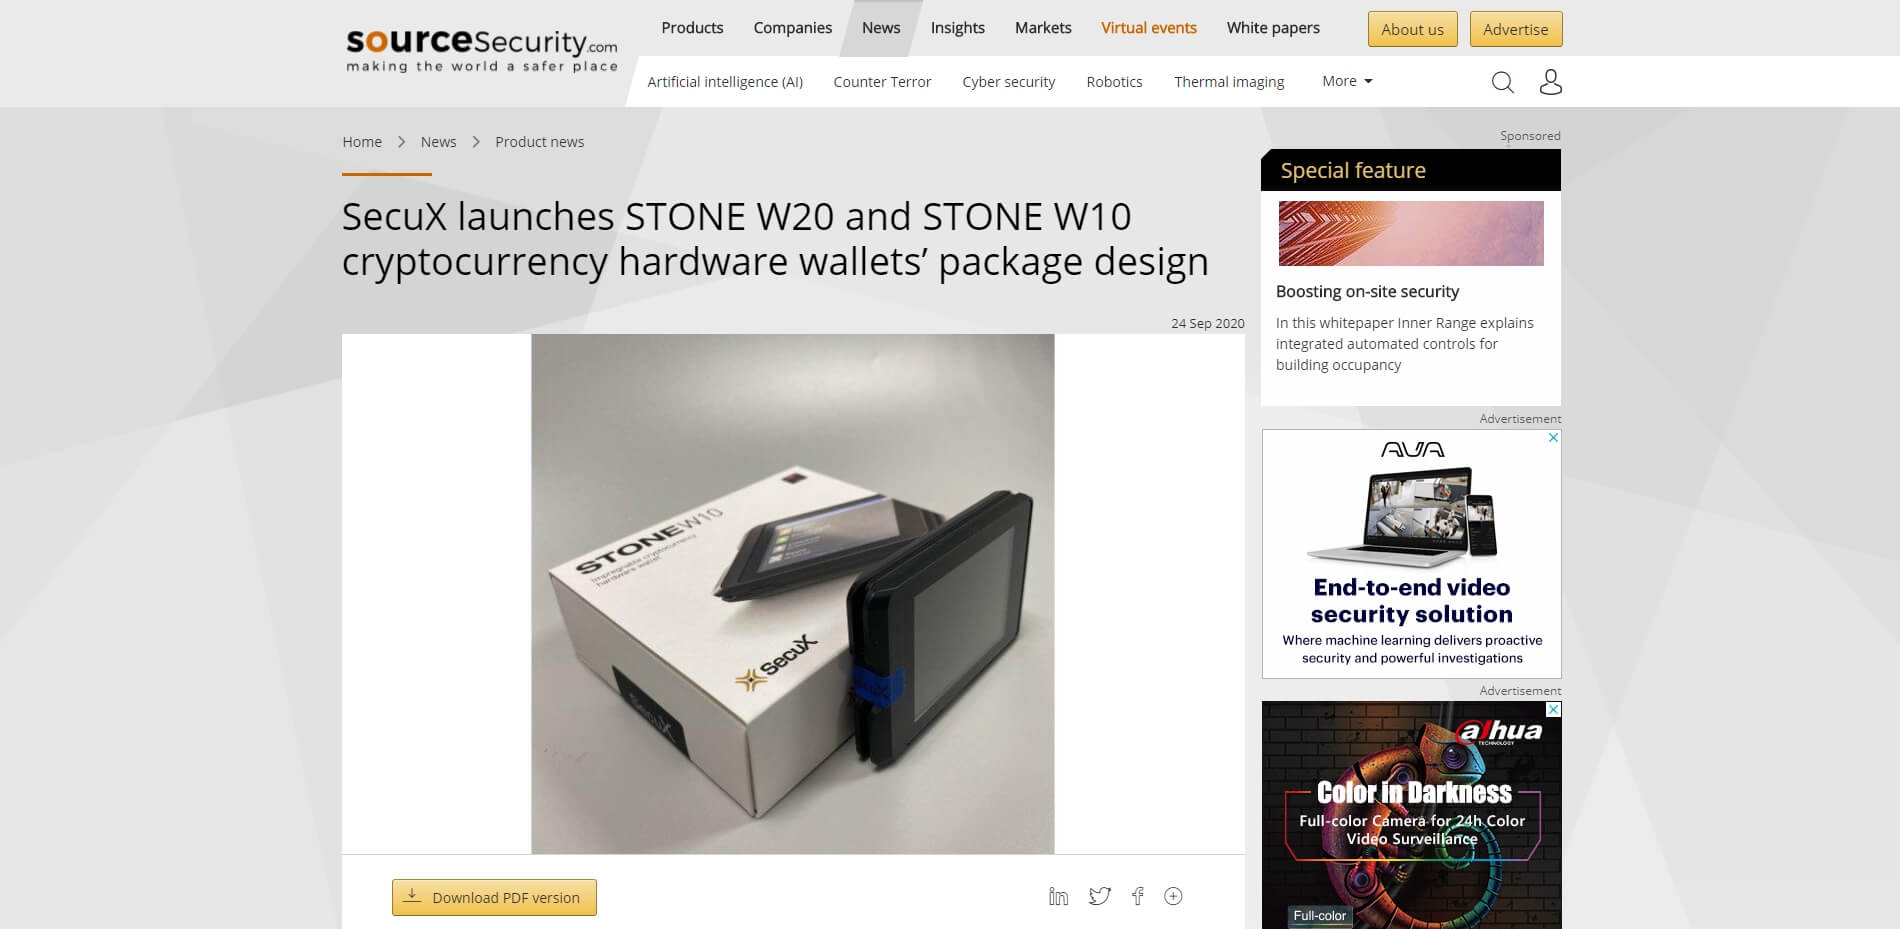 2020 9 24 SourceSecurity SecuX launches STONE W20 and STONE W10 cryptocurrency hardware wallets’ package design